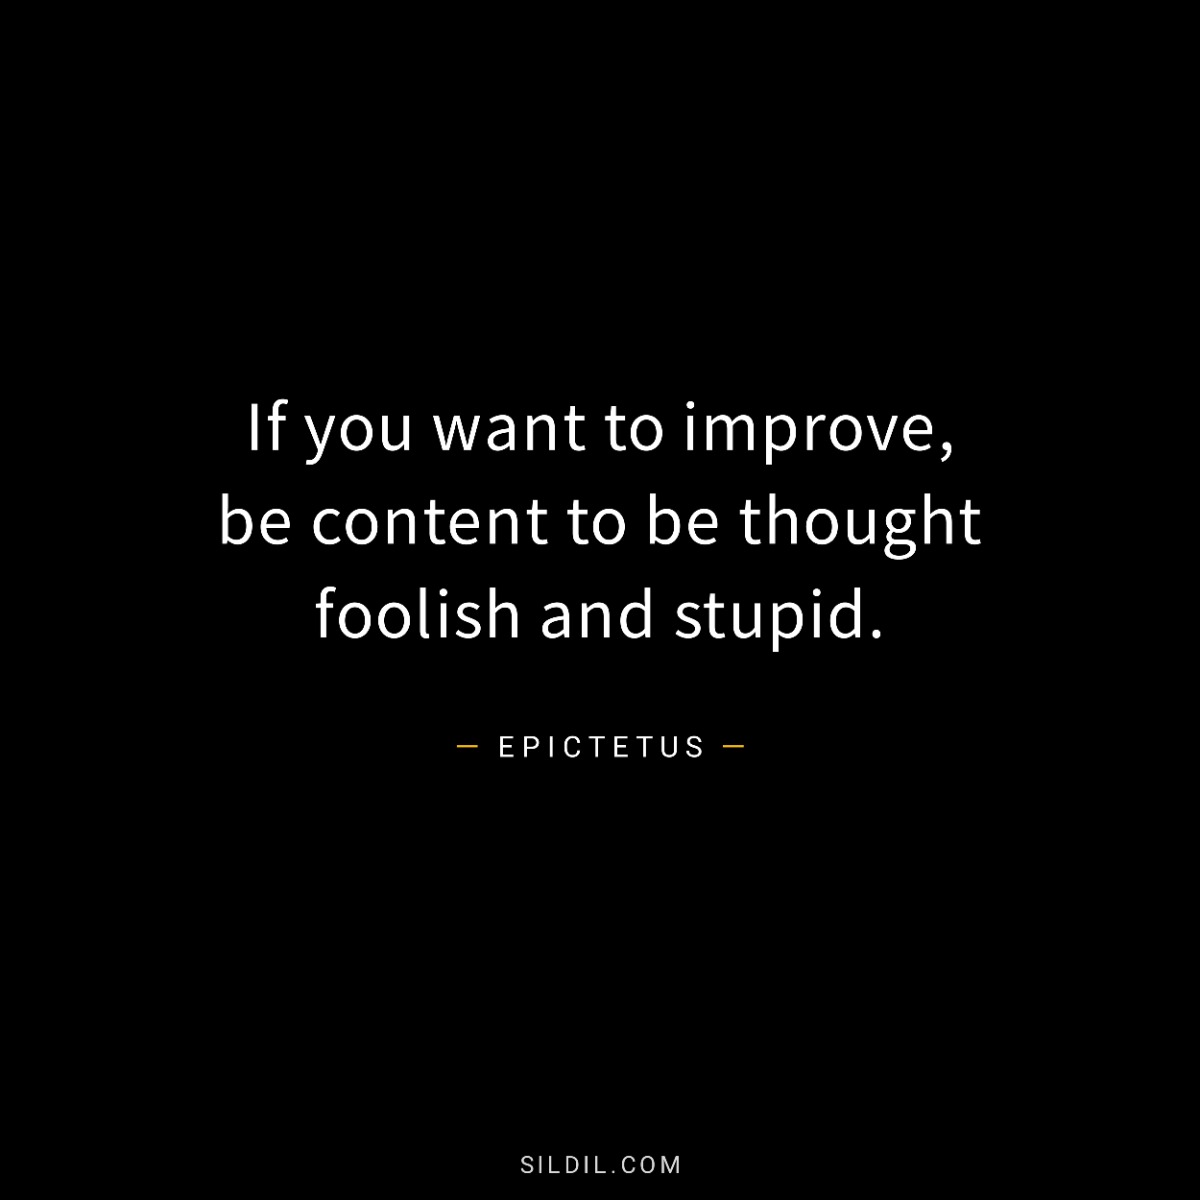 If you want to improve, be content to be thought foolish and stupid.